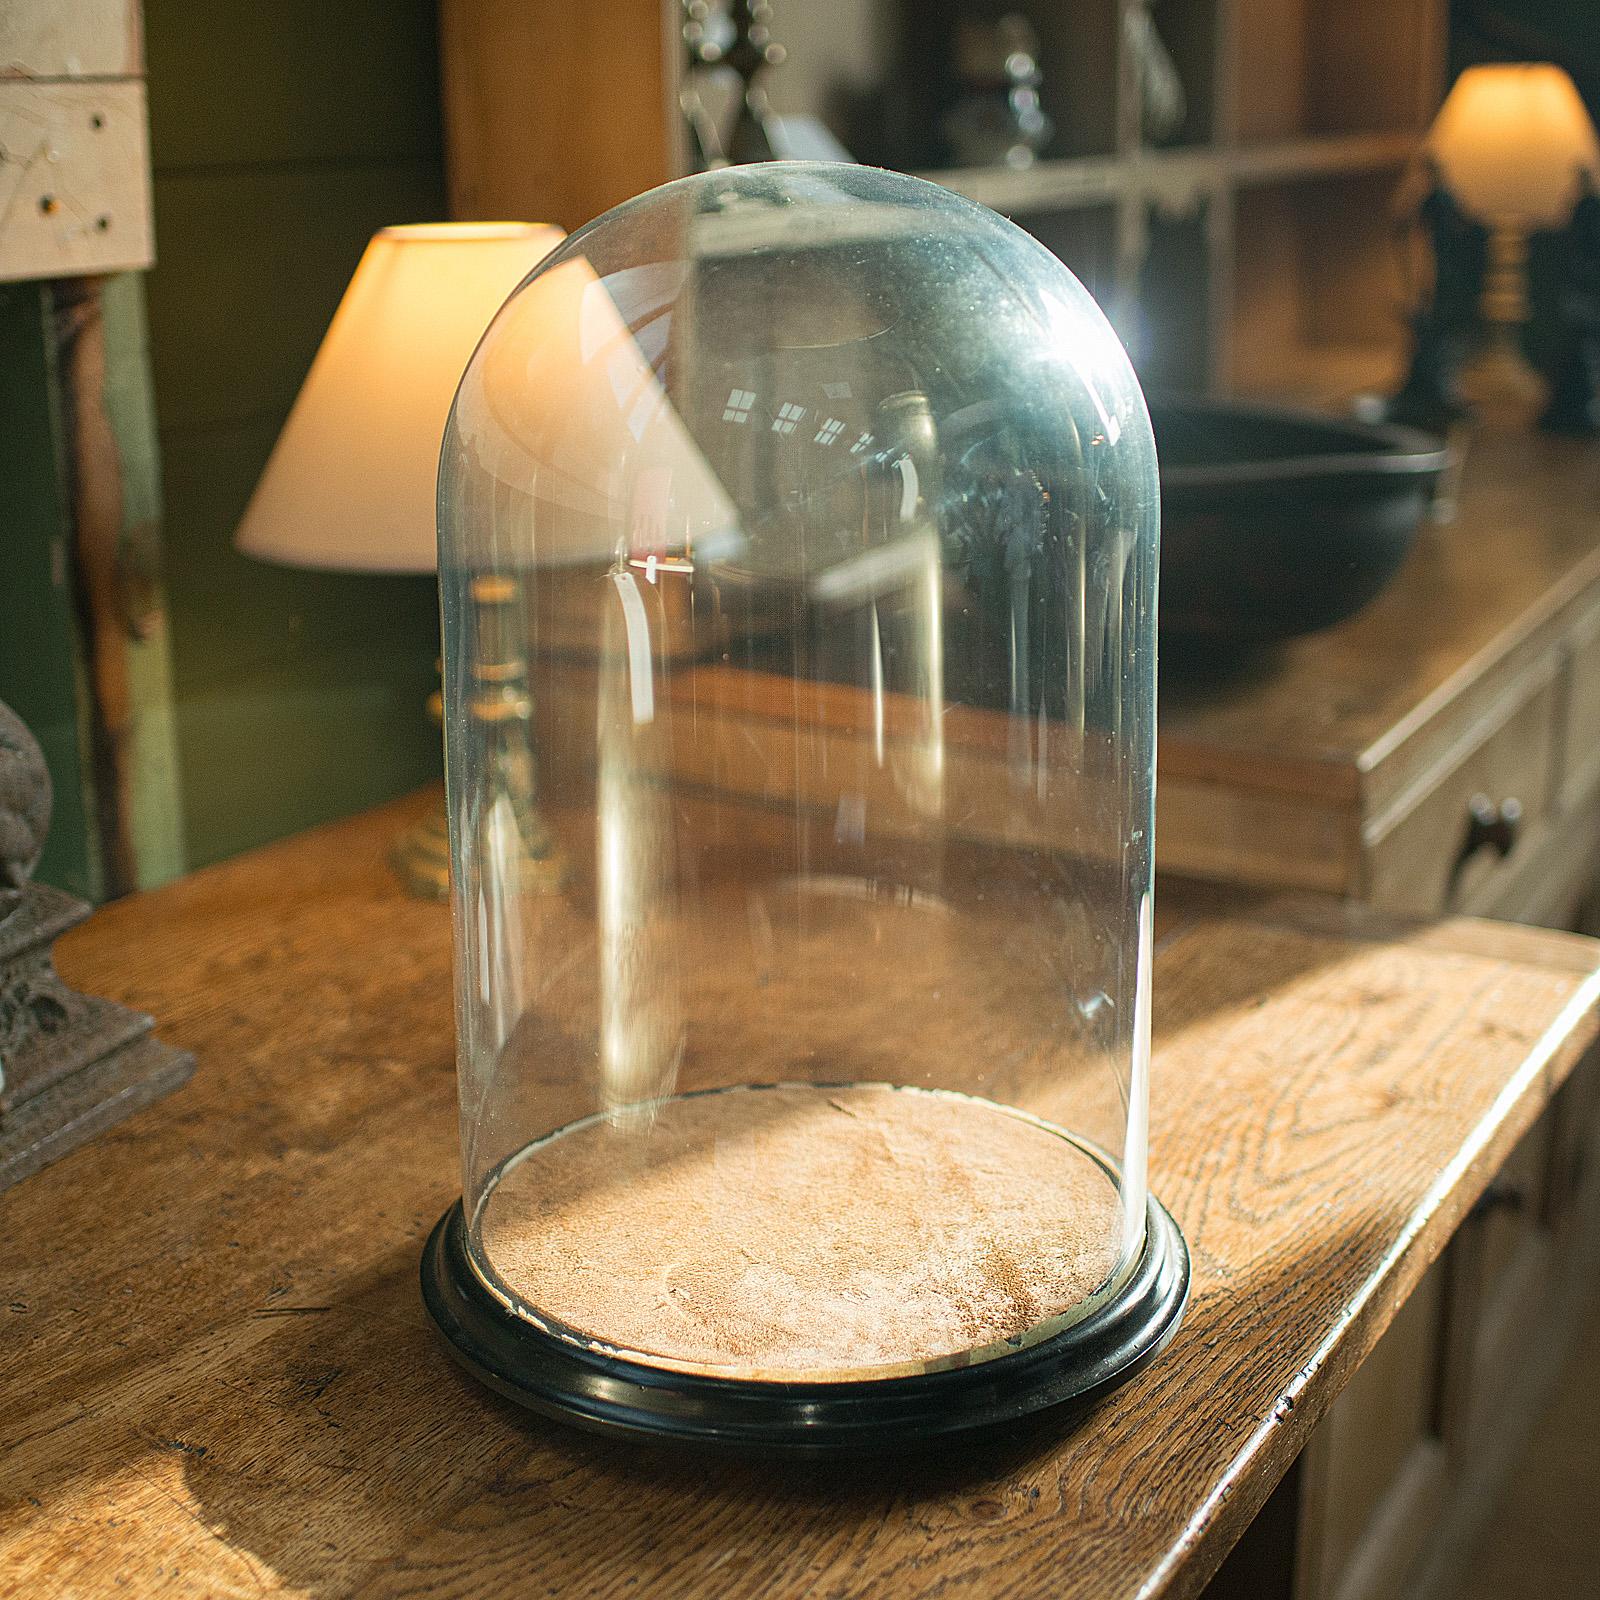 This is an antique mirrored display dome. An English, glass and giltwood exhibition cake or taxidermy showcase, dating to the late Victorian period, circa 1880.

Wide proportion, with a striking mirrored interior - a delightful exhibition